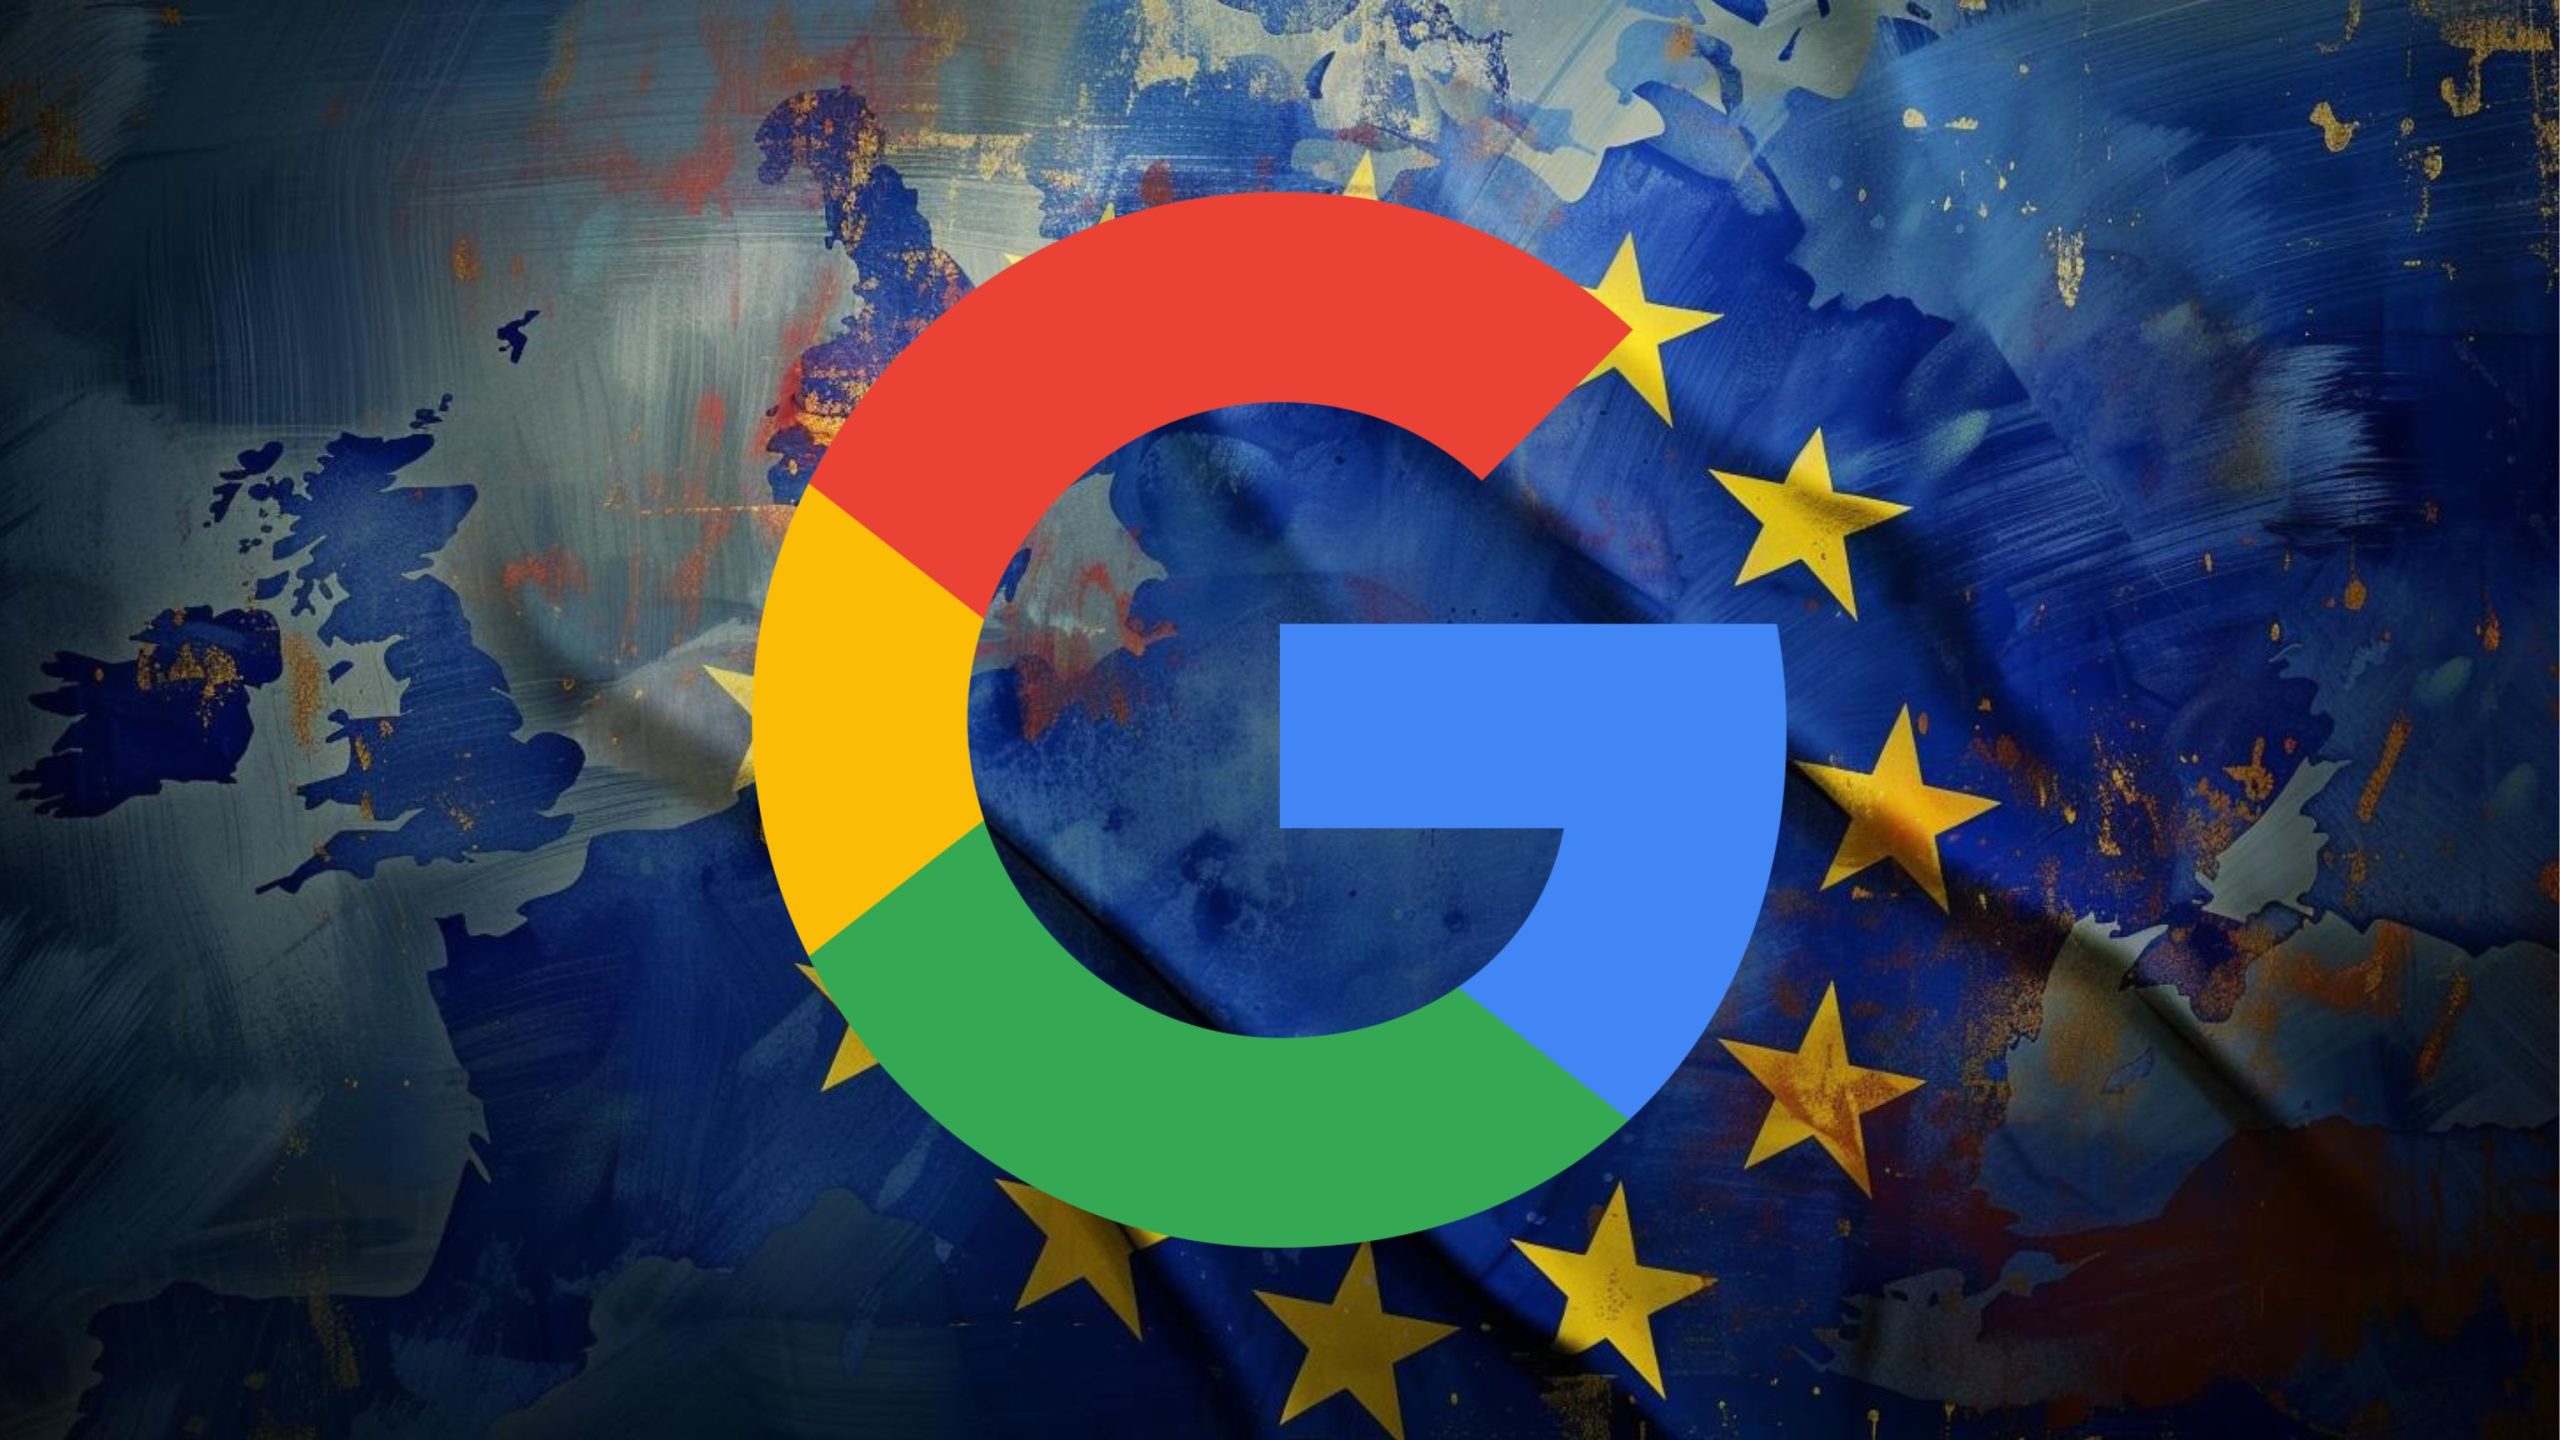 Google Vows To Use AI Models and Work With EU Anti-“Disinformation” Groups and Global “Fact-Checking” Groups To Censor “Misinformation,” “Hate”